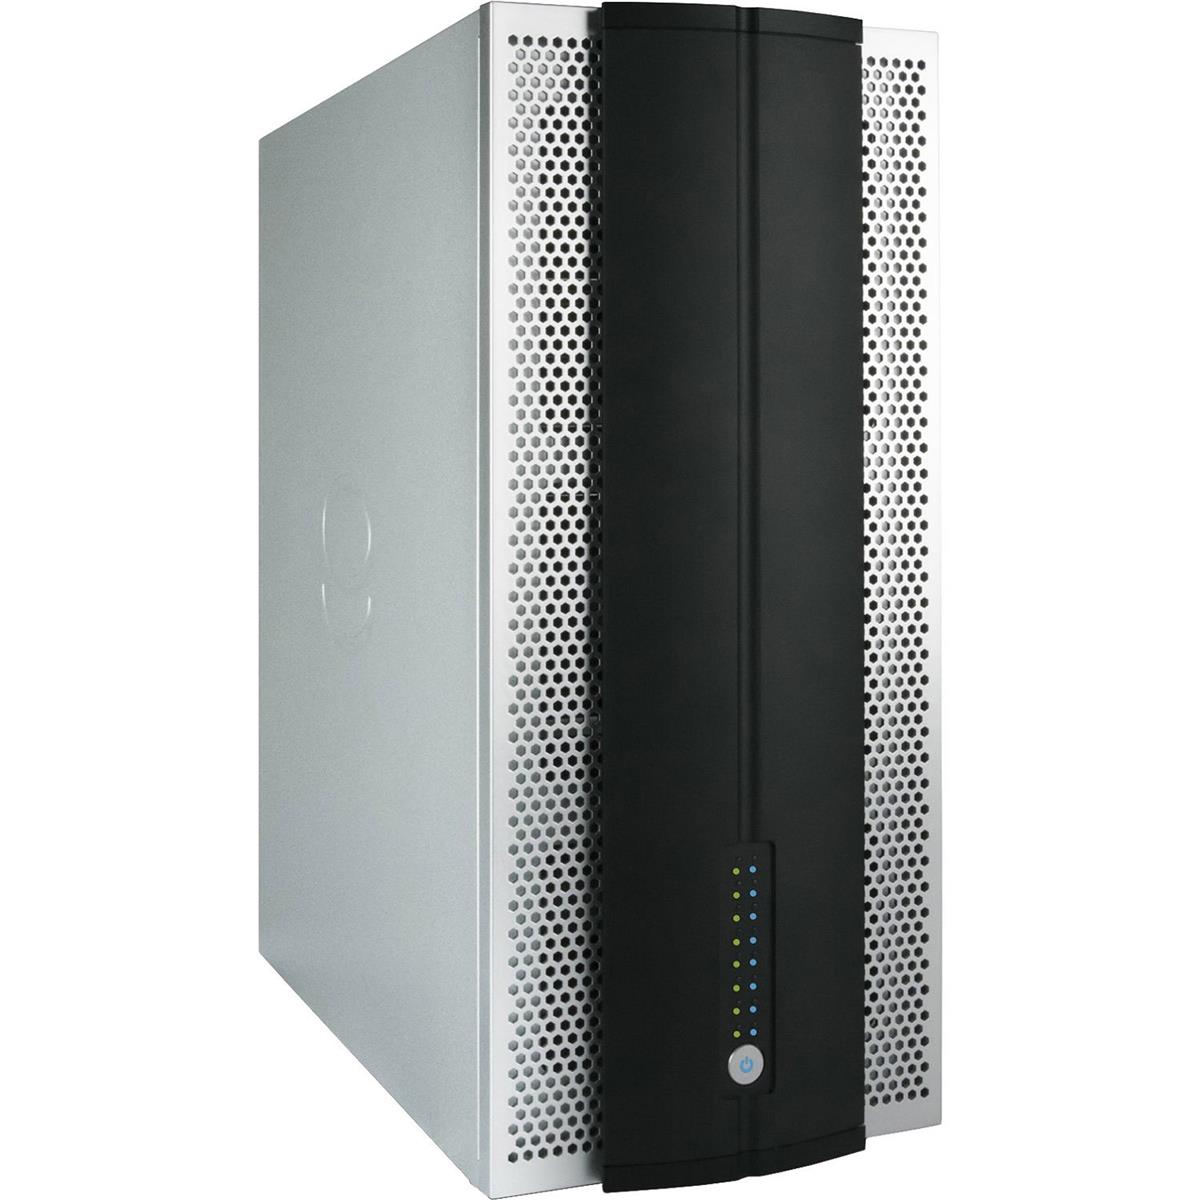 Image of Accusys MAX 24 2x Tower RAID Storage System